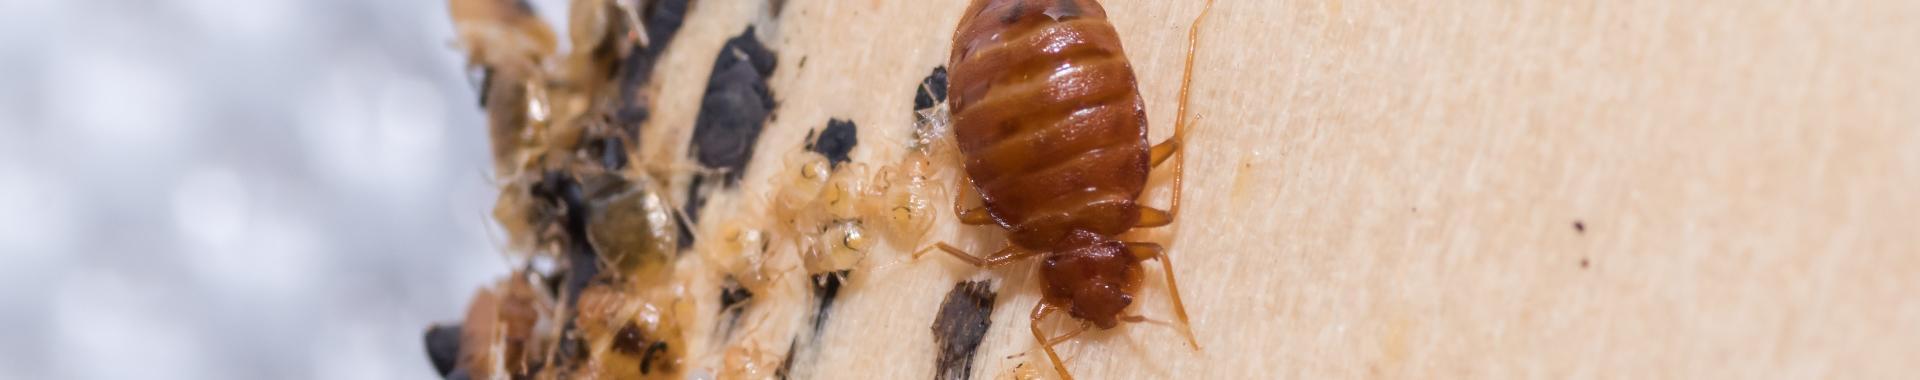 adult bed bug on bed with nymphs and fecal matter